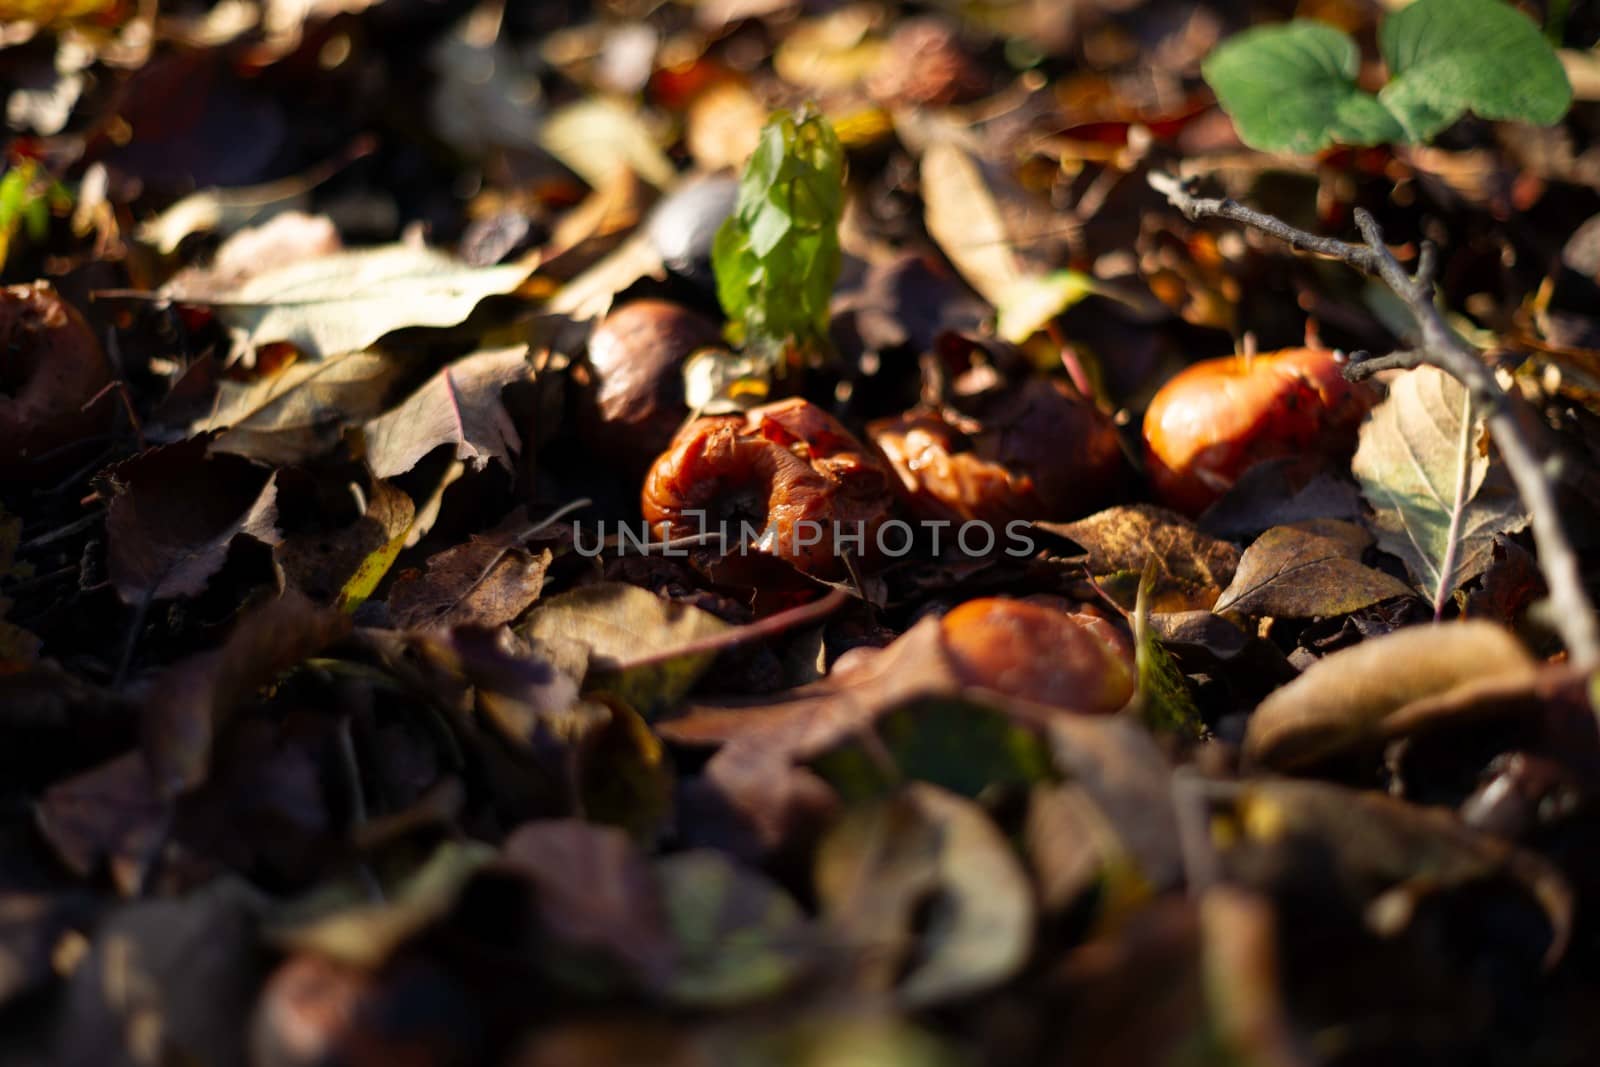 Rotten frozen apples on dark ground with orange leaves in apple garden. October frost and blurred background. by alexsdriver